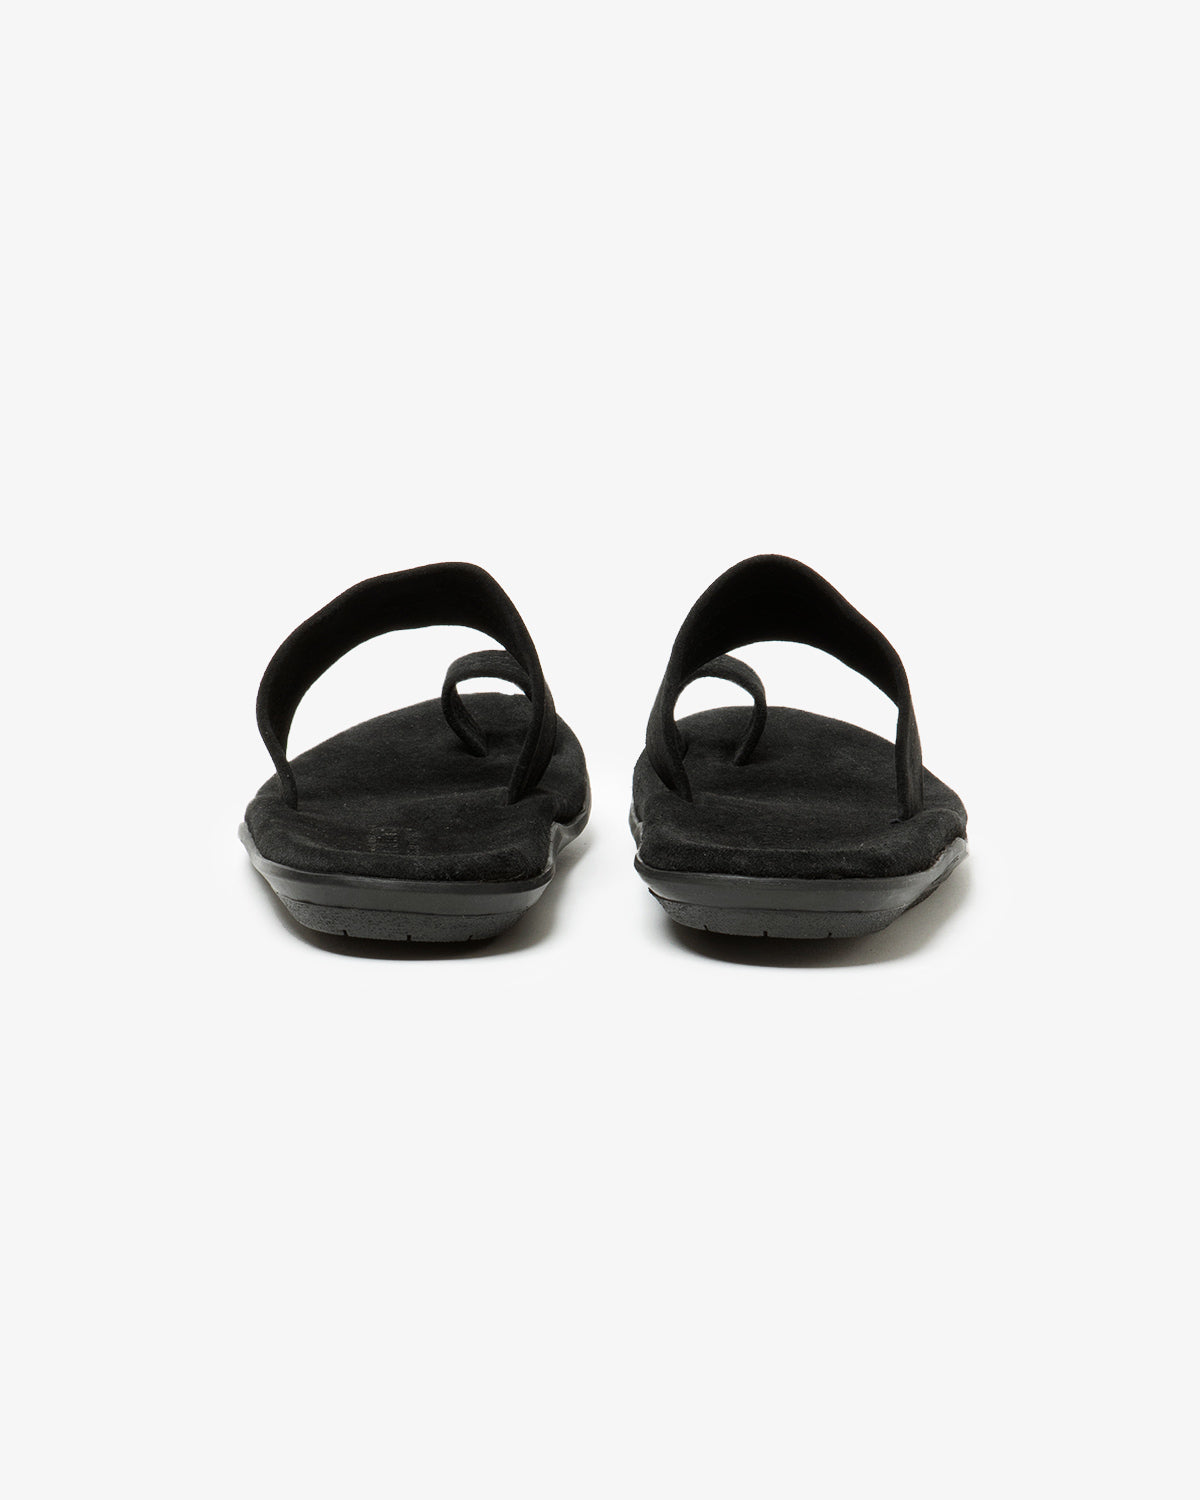 RANCHER SANDAL COW LEATHER BY ISLAND SLIPPER